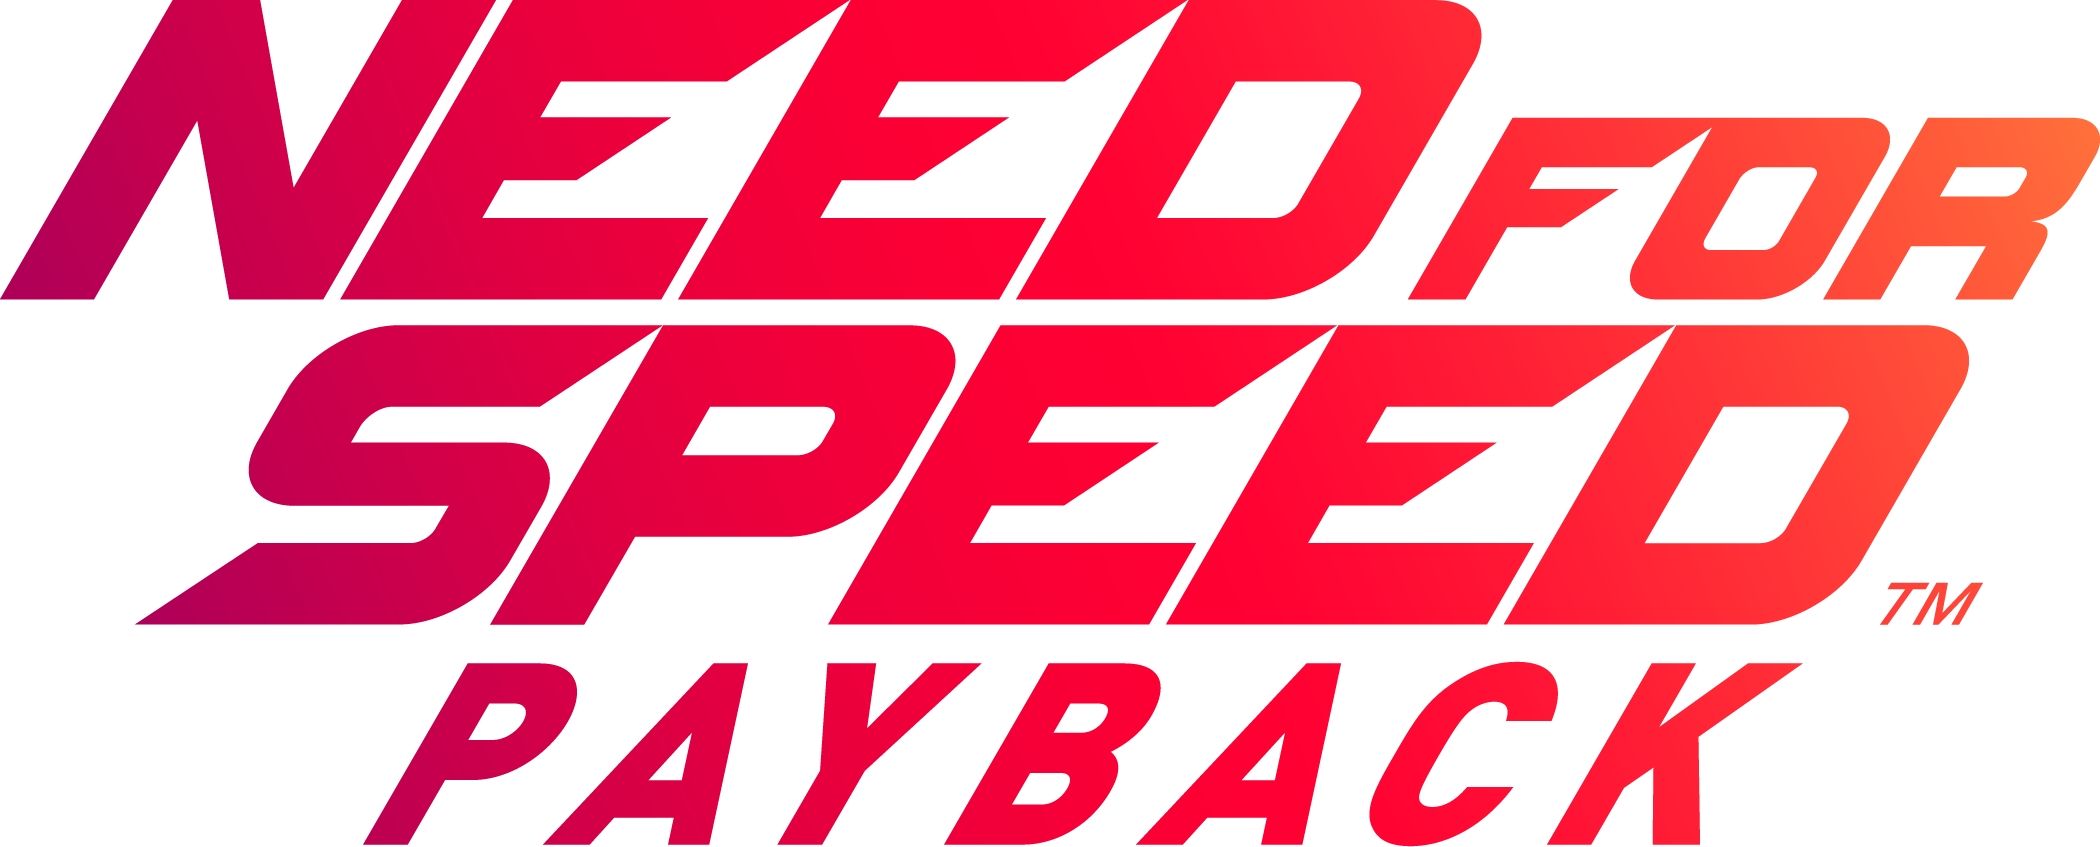 Need For Speed Payback カーレースアクションゲーム Ea公式サイト